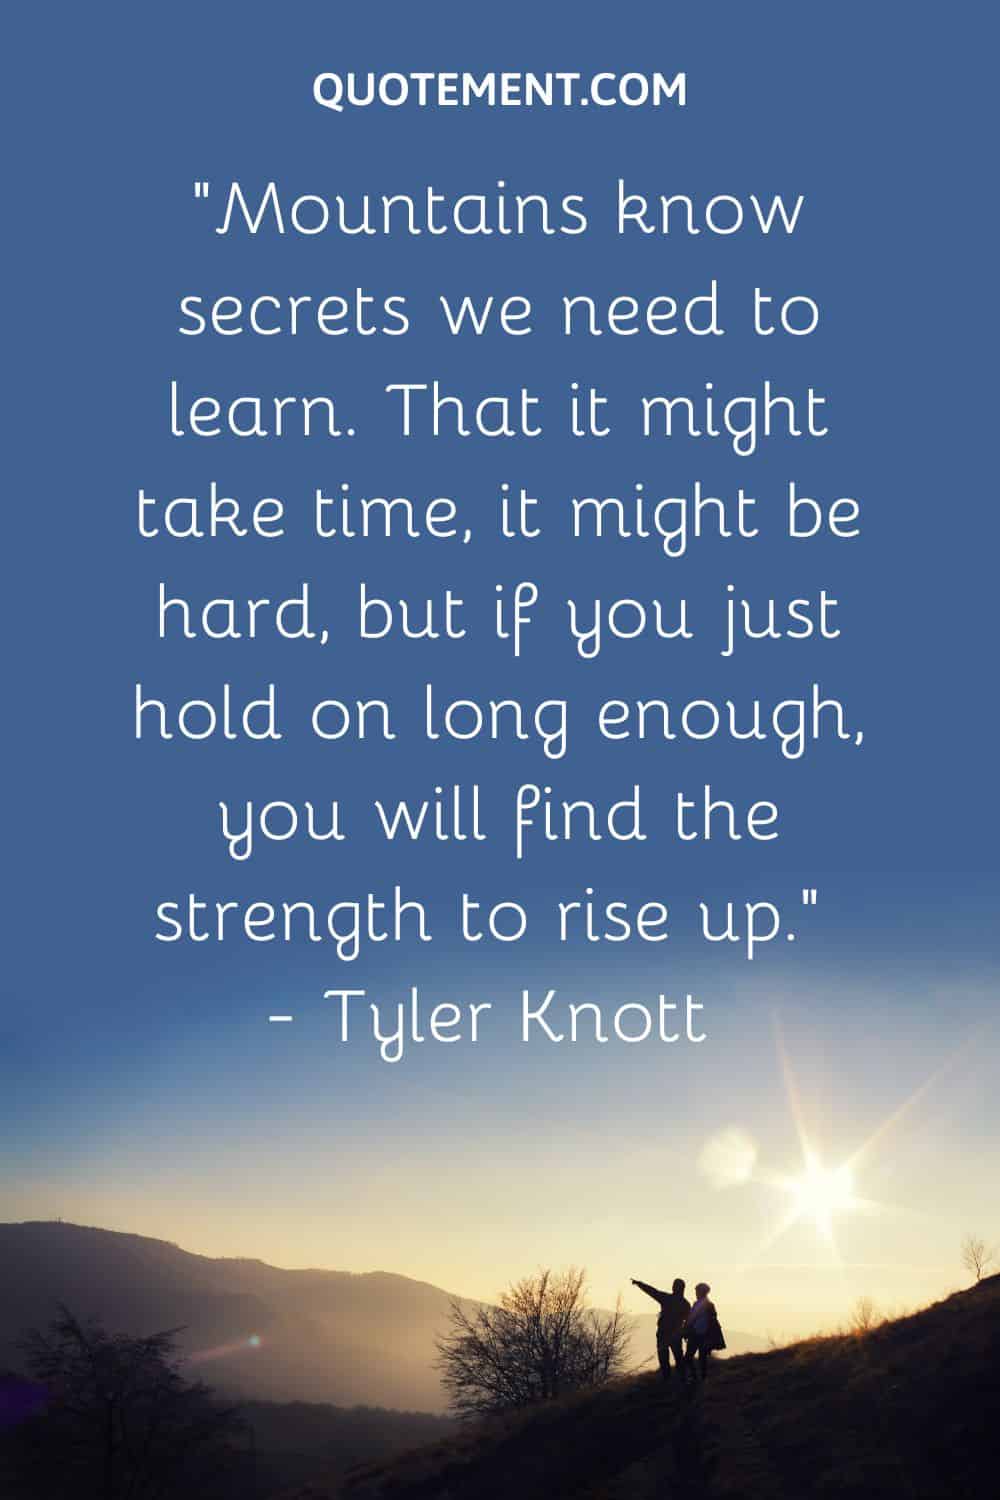 “Mountains know secrets we need to learn. That it might take time, it might be hard, but if you just hold on long enough, you will find the strength to rise up.” — Tyler Knott